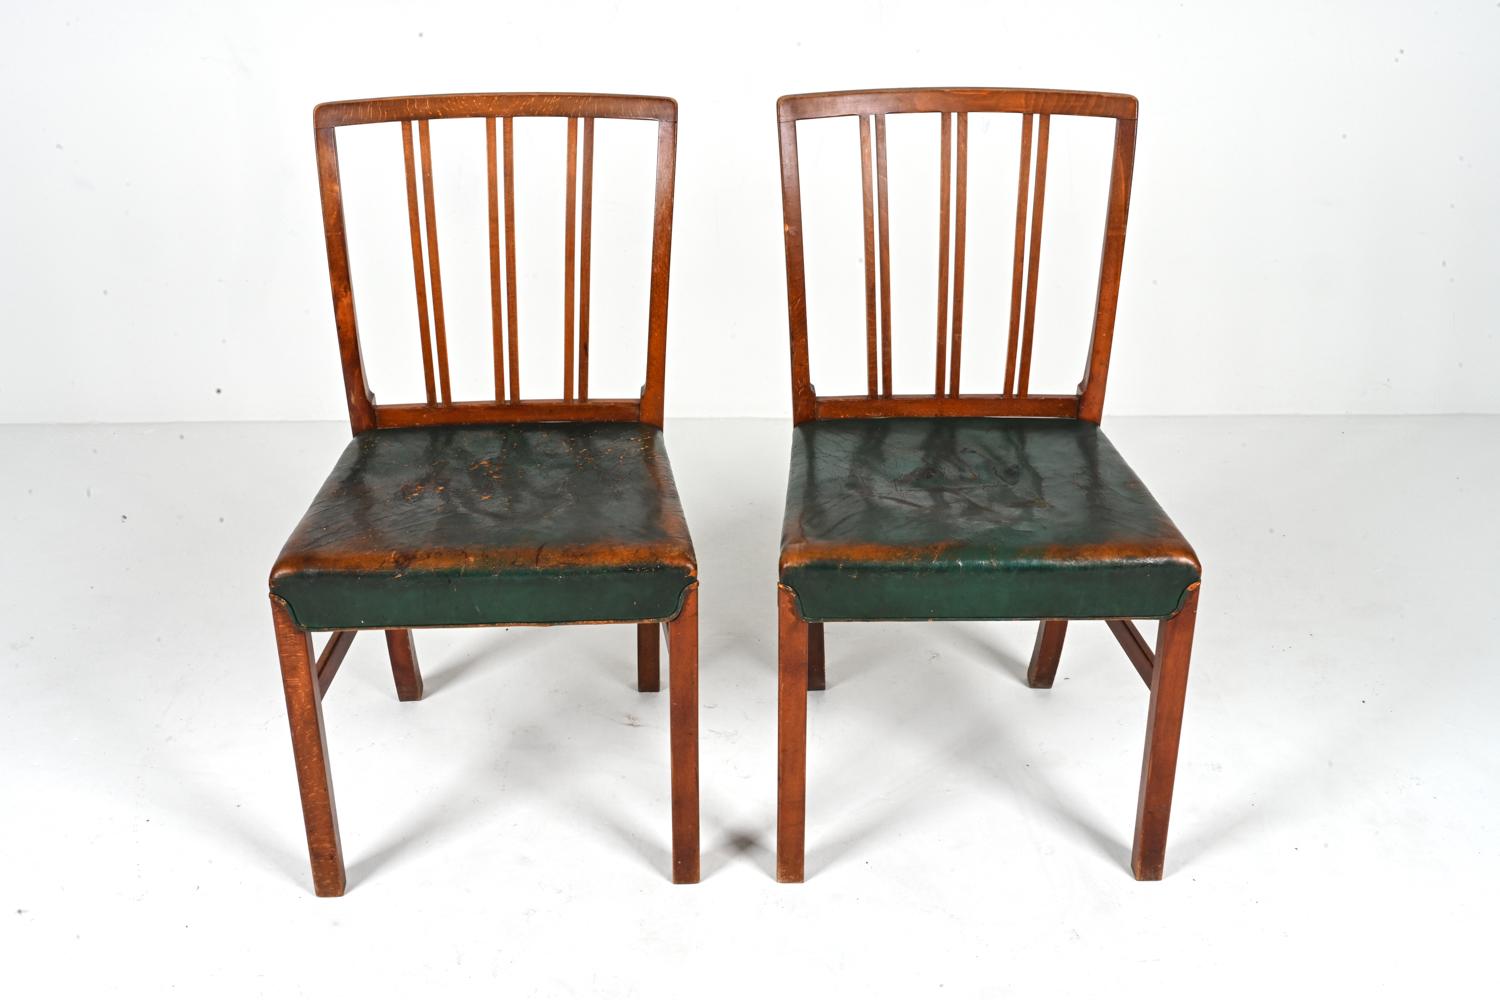 '12' Rare Model 1675B Dining Chairs by Ole Wanscher Fritz Hansen, c. 1940's For Sale 2